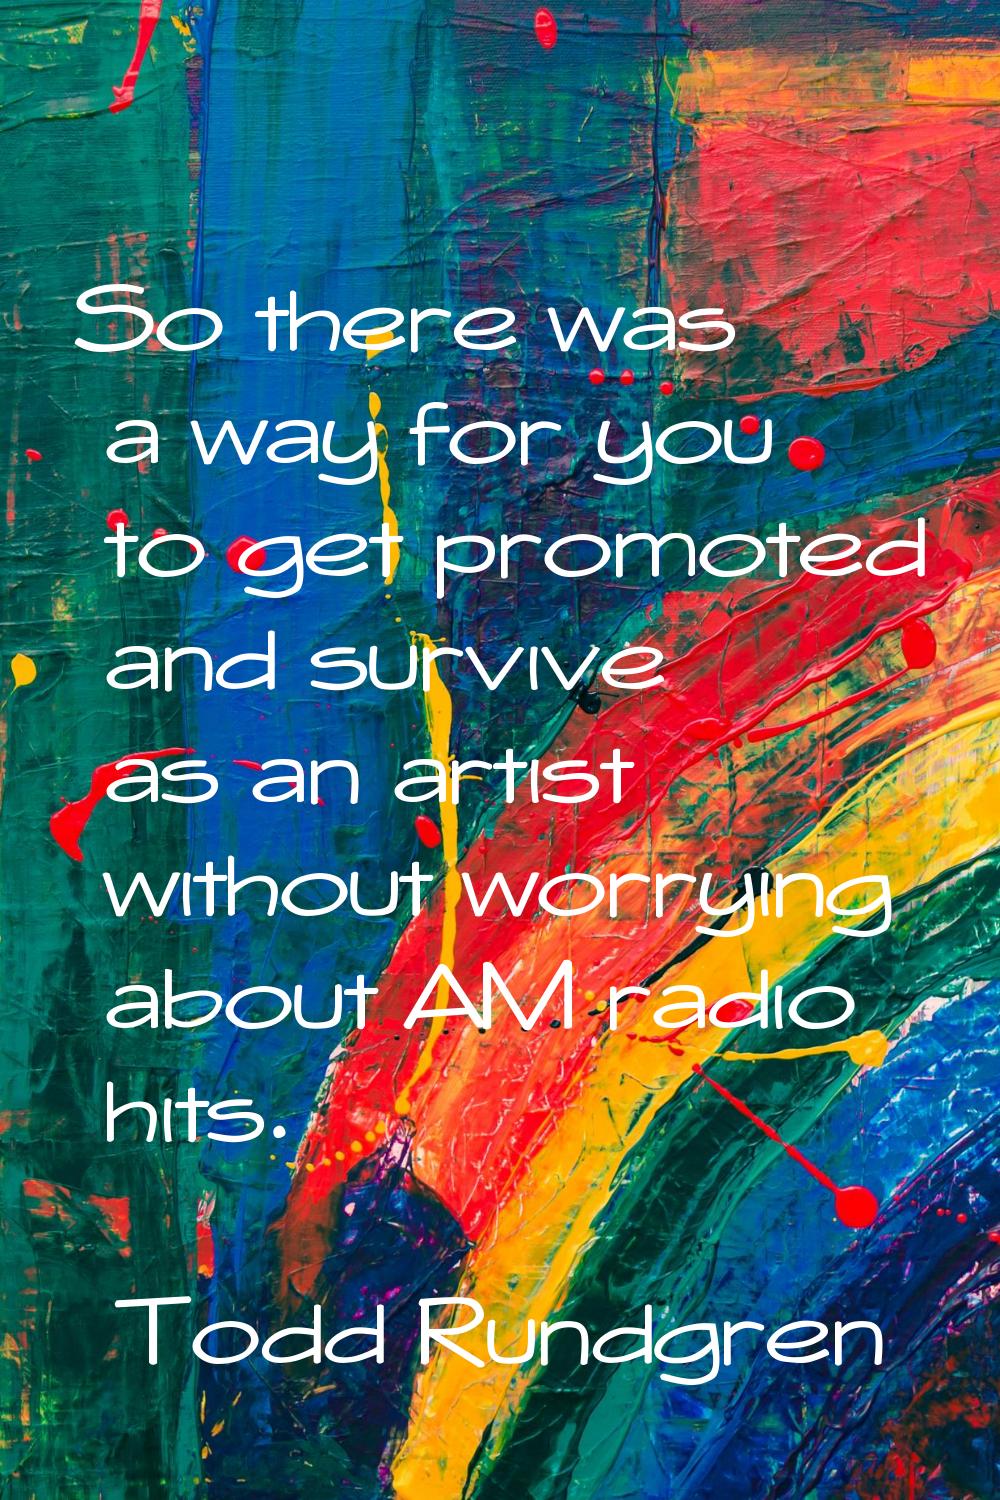 So there was a way for you to get promoted and survive as an artist without worrying about AM radio